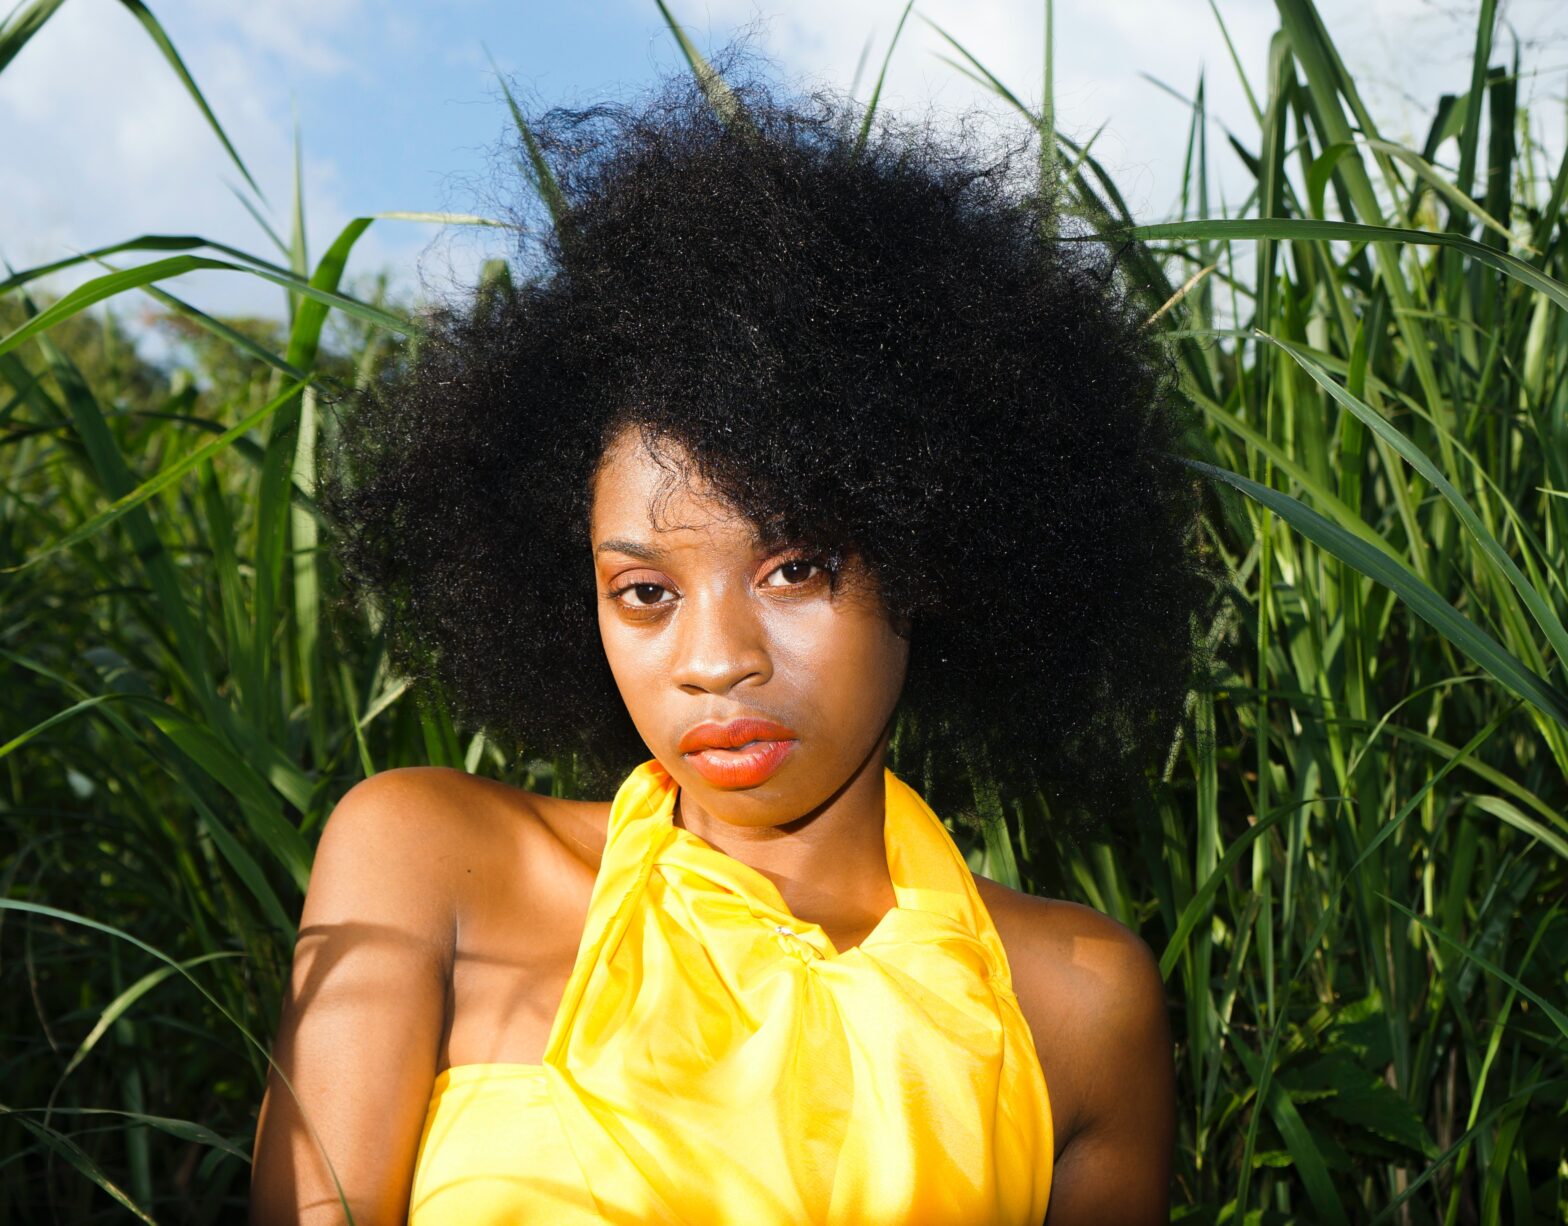 Looking To Celebrate Natural Hair? Head To CURLFEST This July